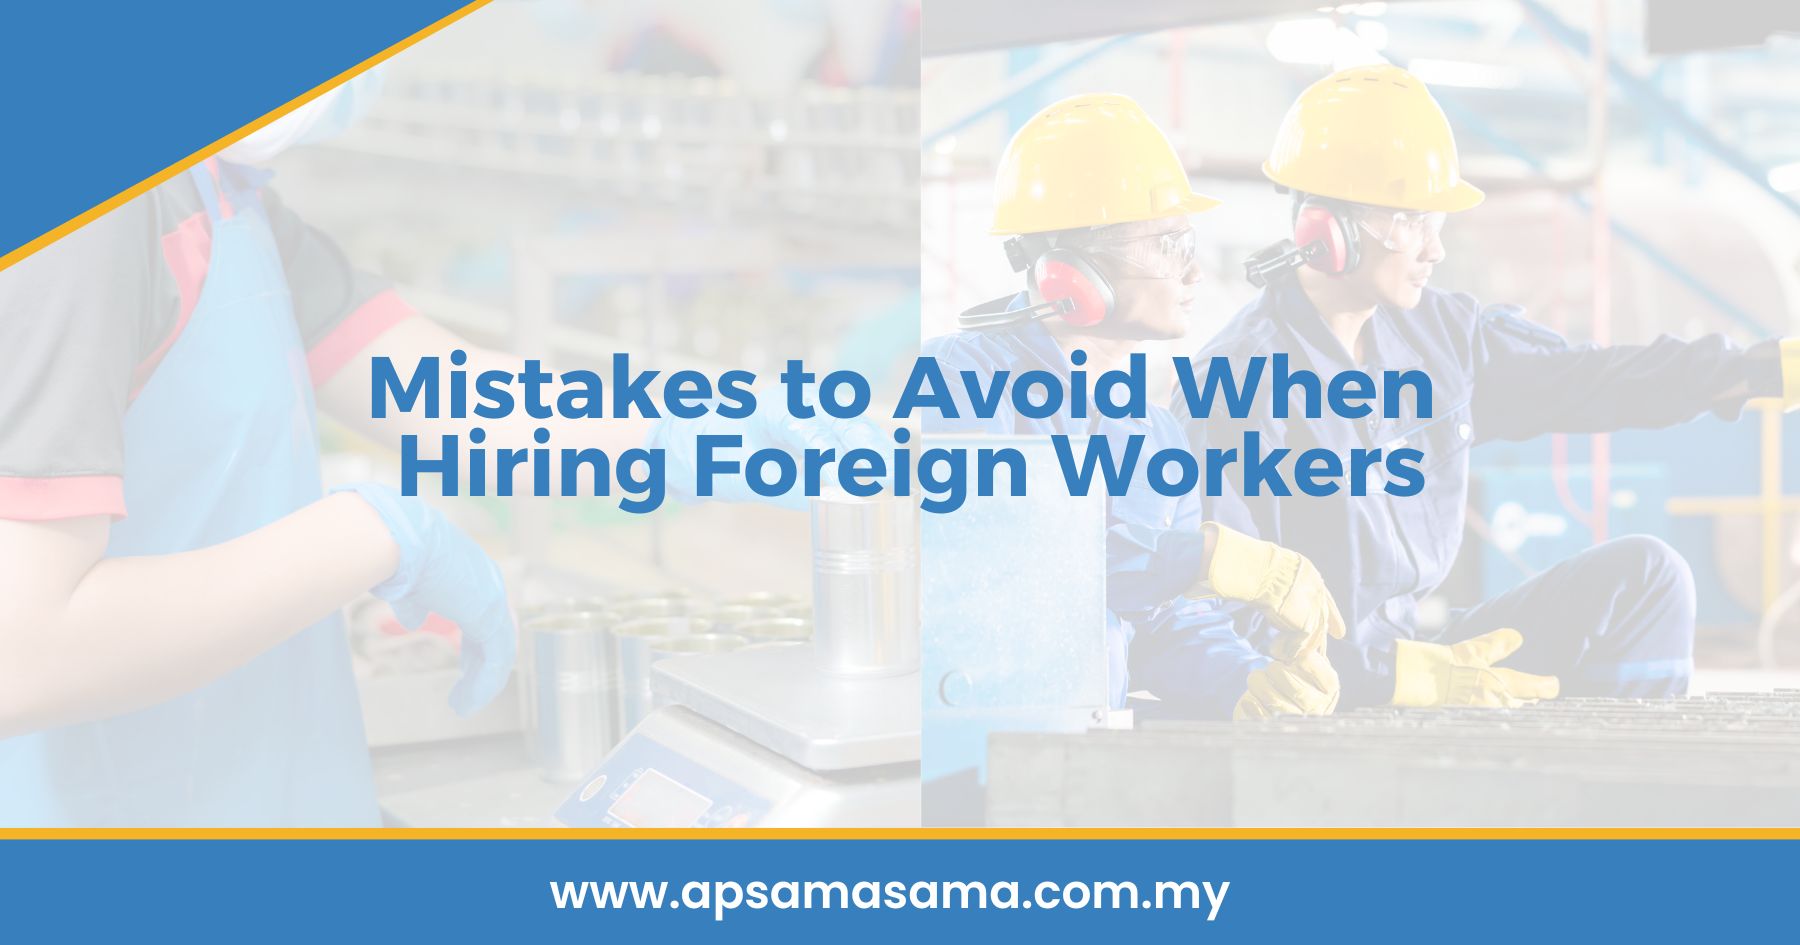 Mistakes to Avoid When Hiring Foreign Workers